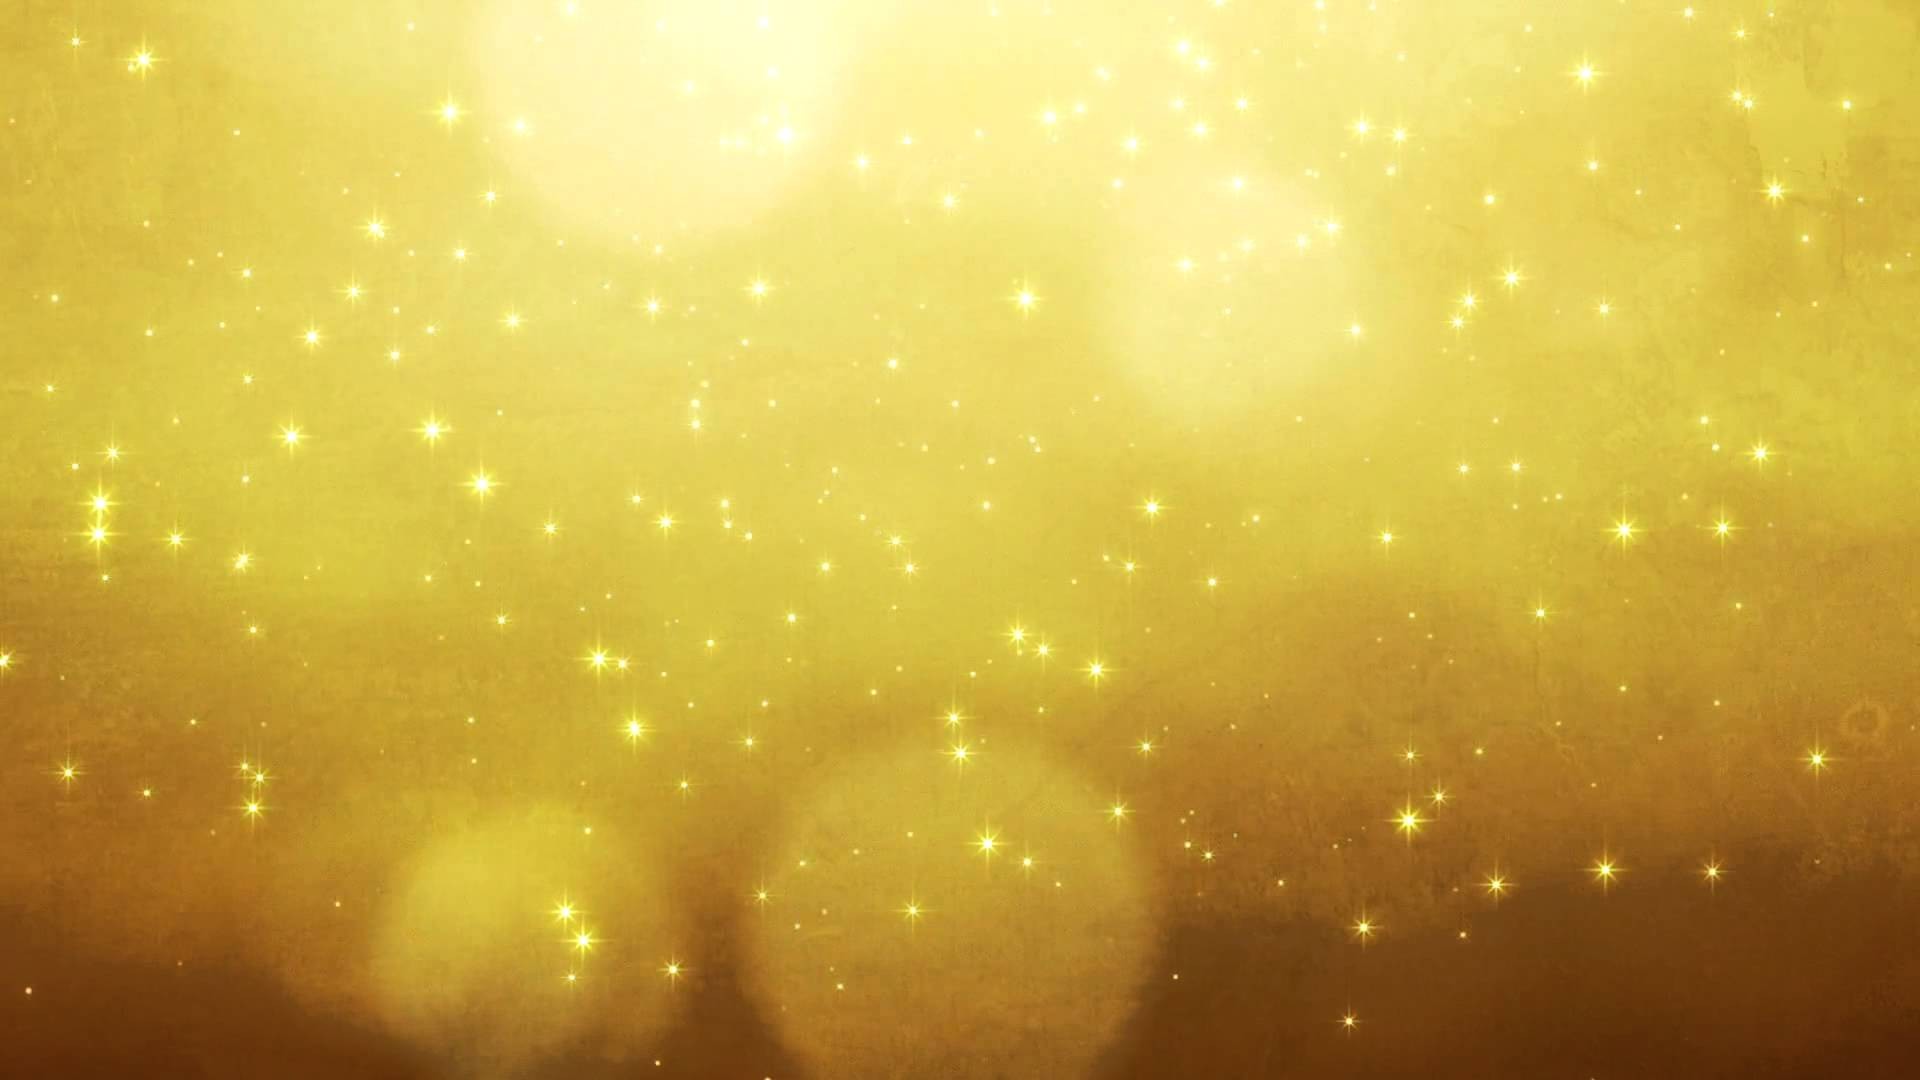 Shiny Gold background ·① Download free awesome backgrounds for desktop